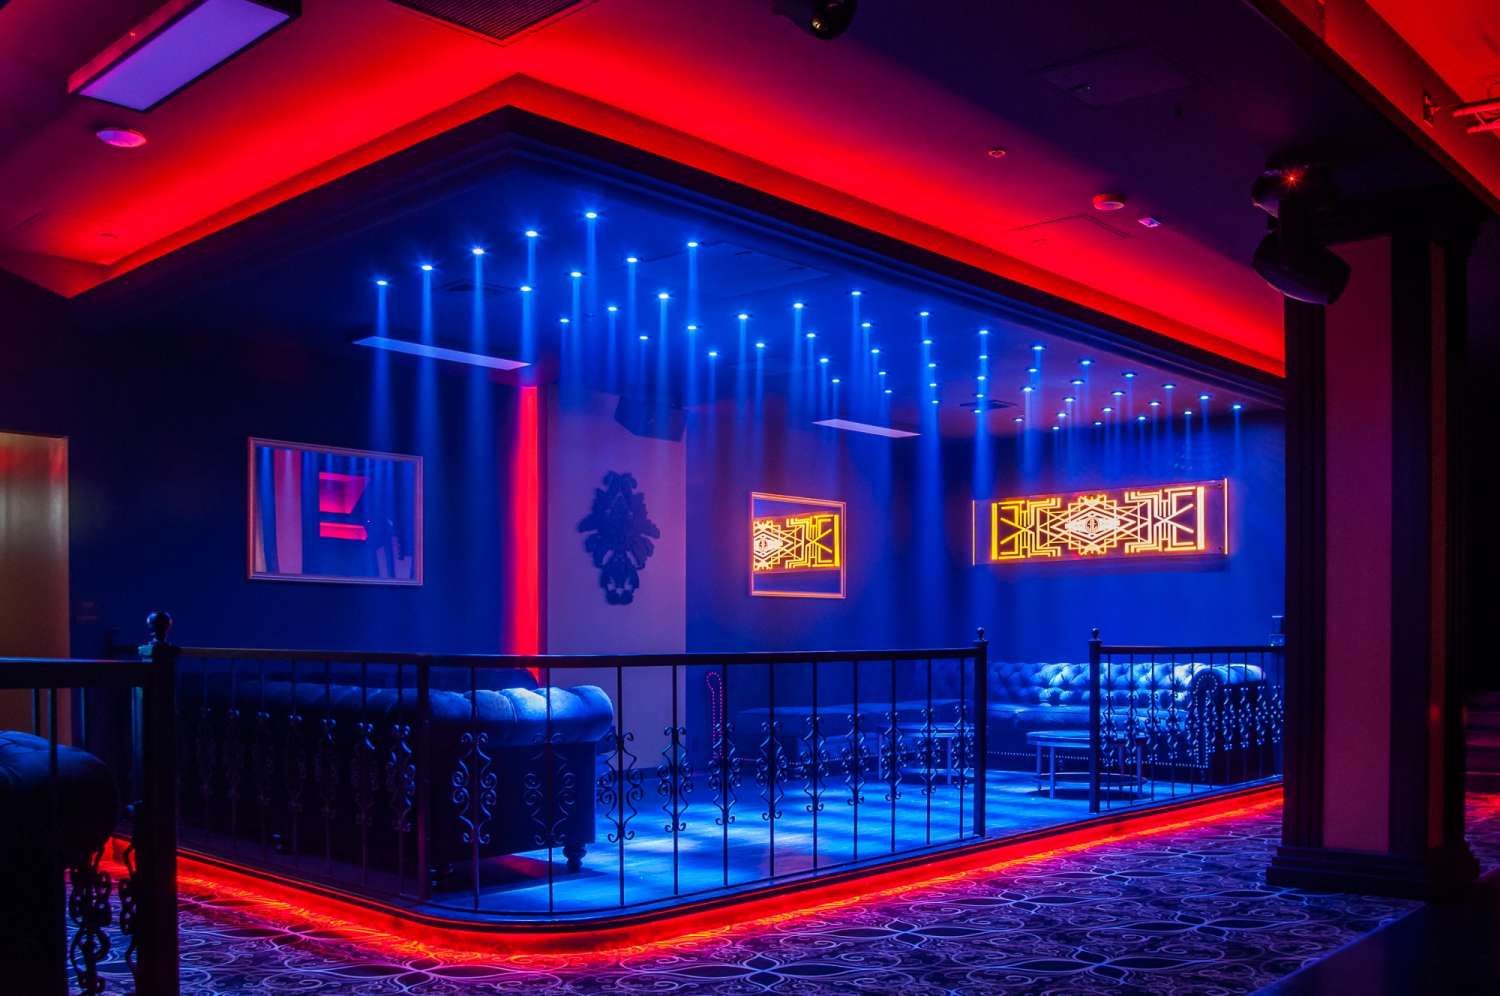 Rumba Room Live has enlivened the entertainment scene in Anaheim with a quality dose of Latin culture